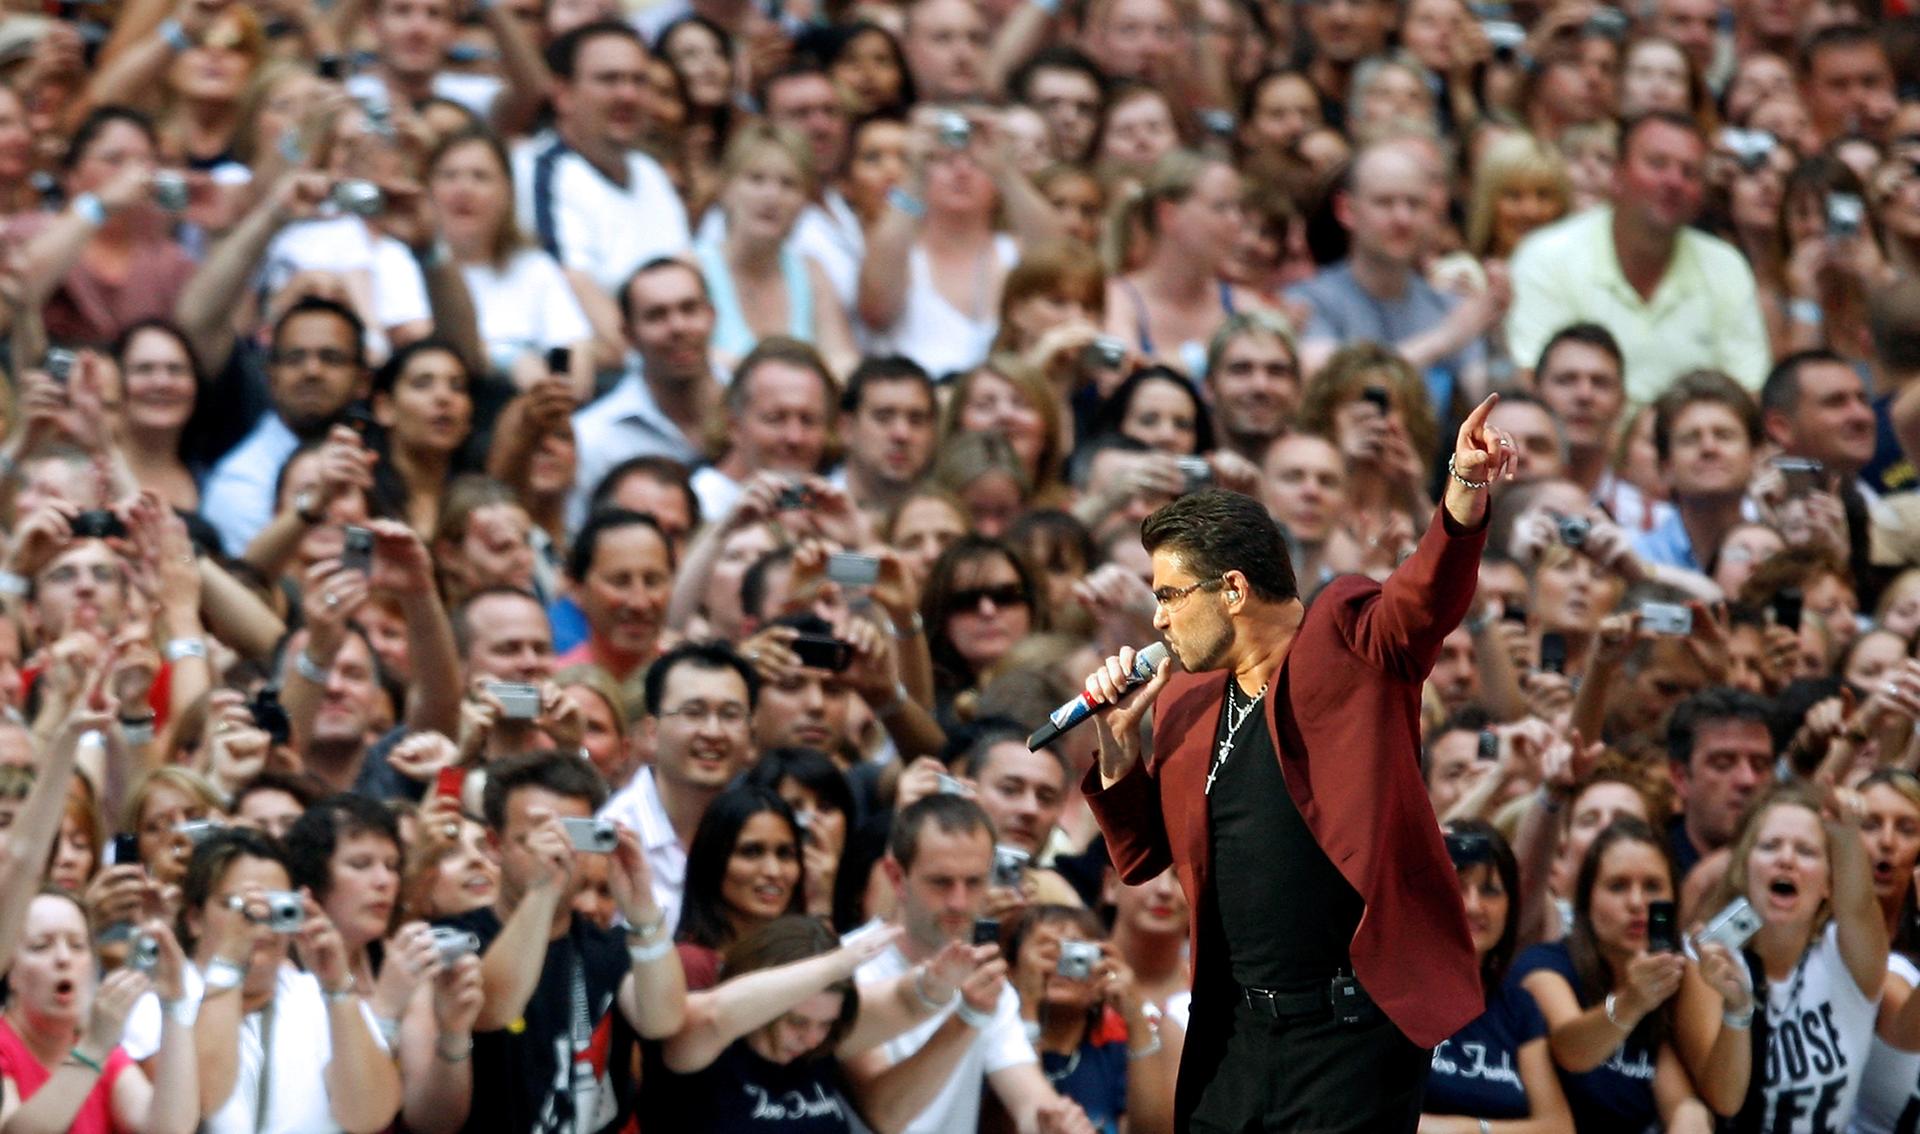 George Michael with a microphone in front of a crowd